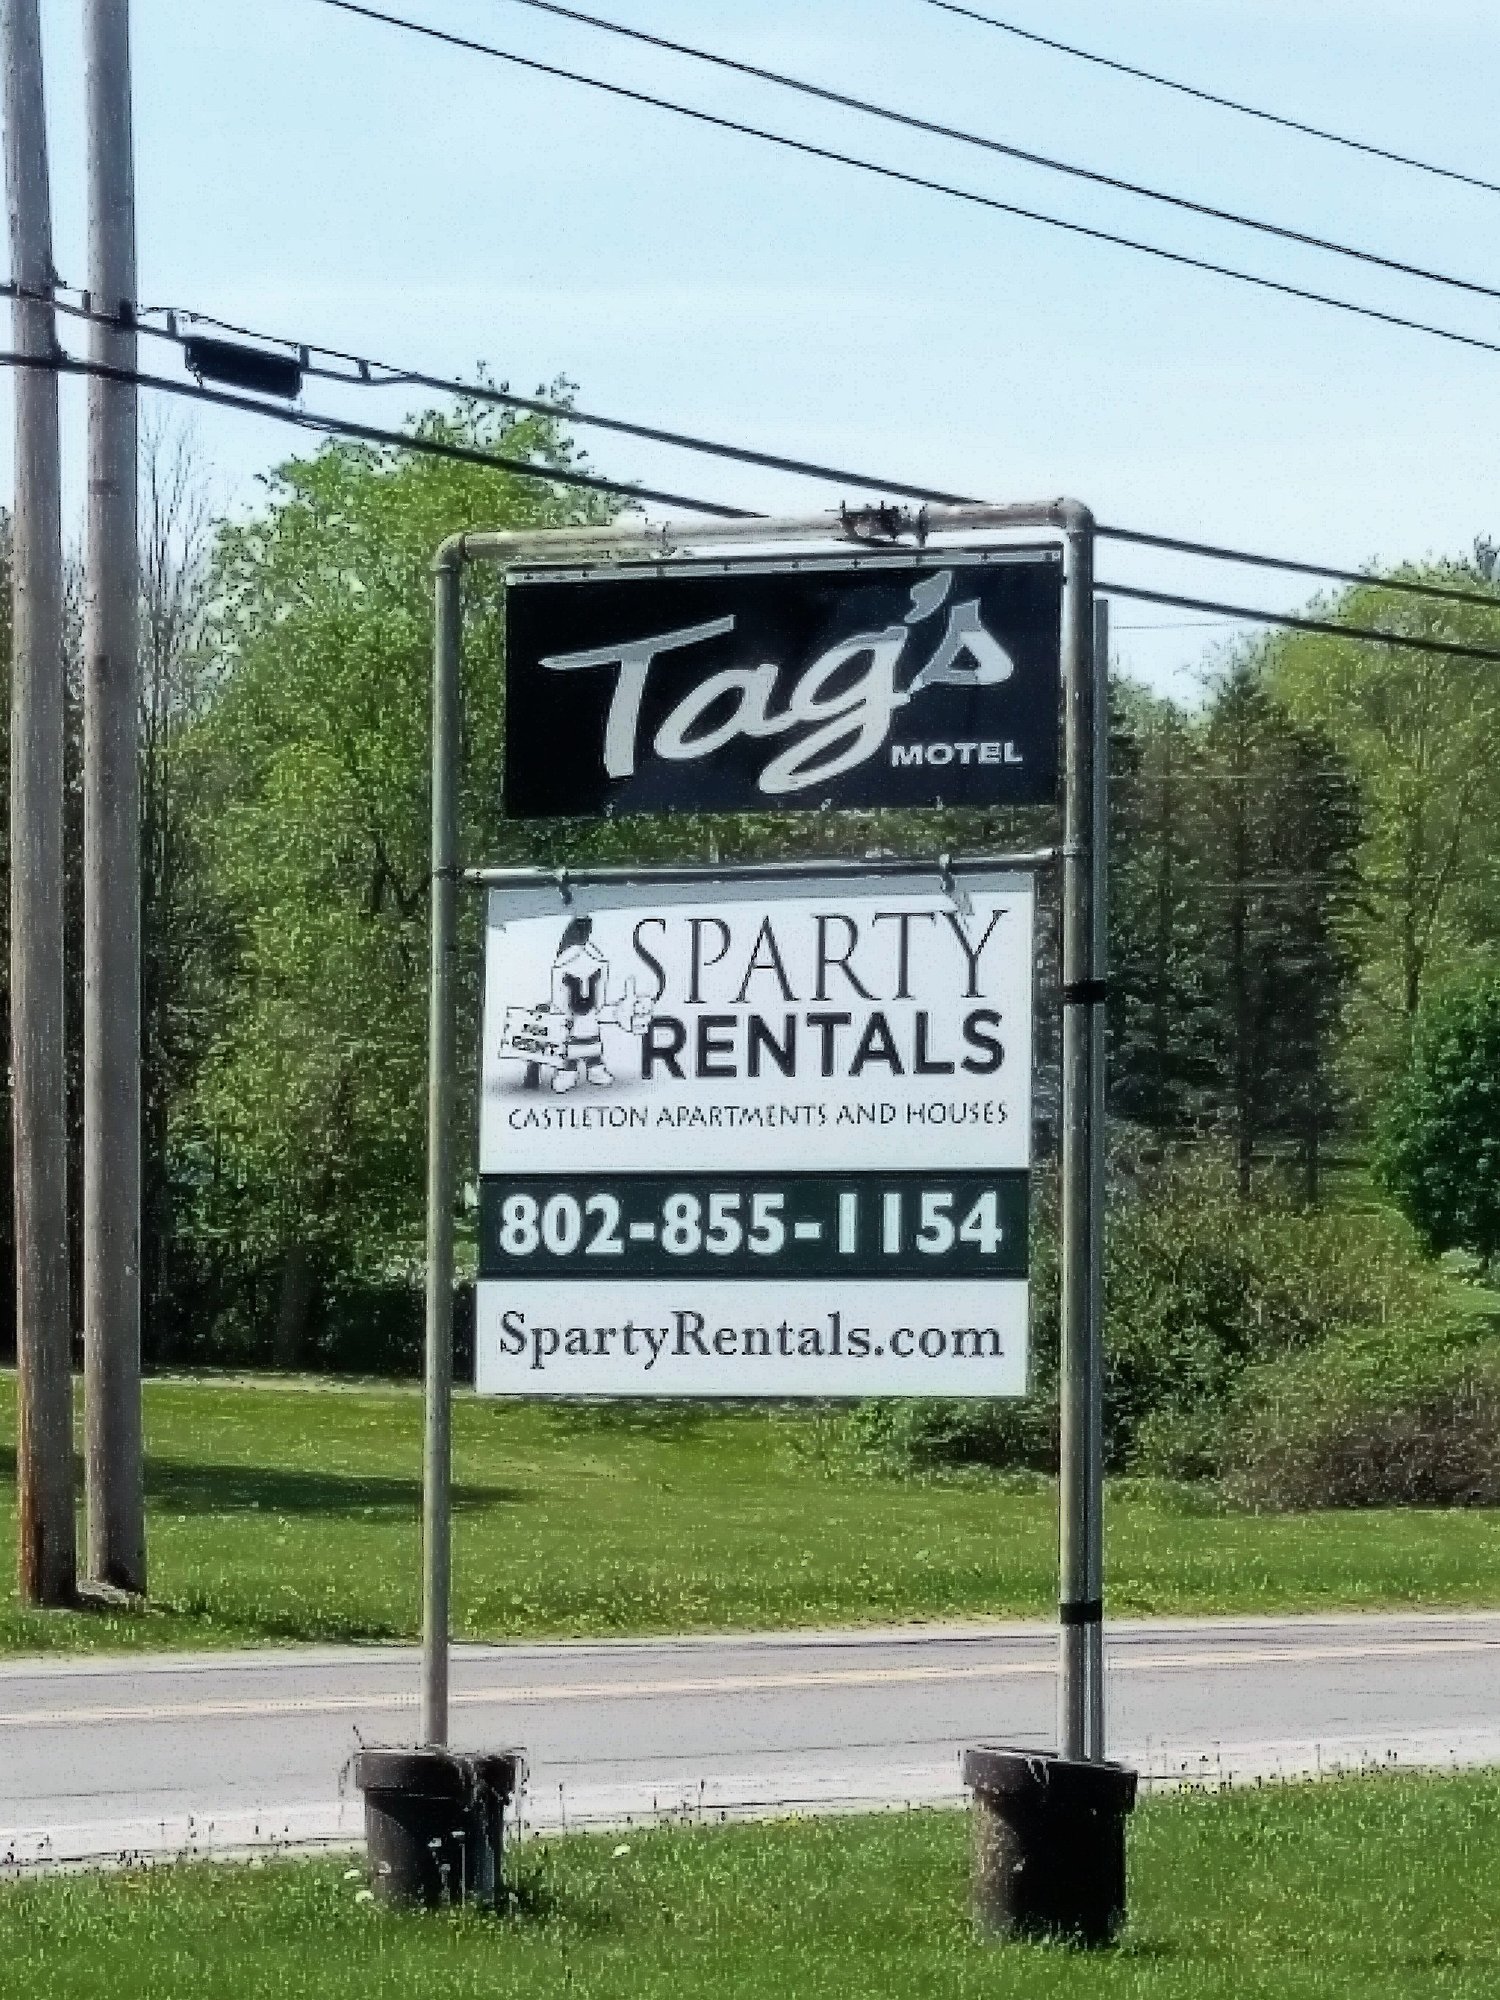 Tag's+Sign.jpg